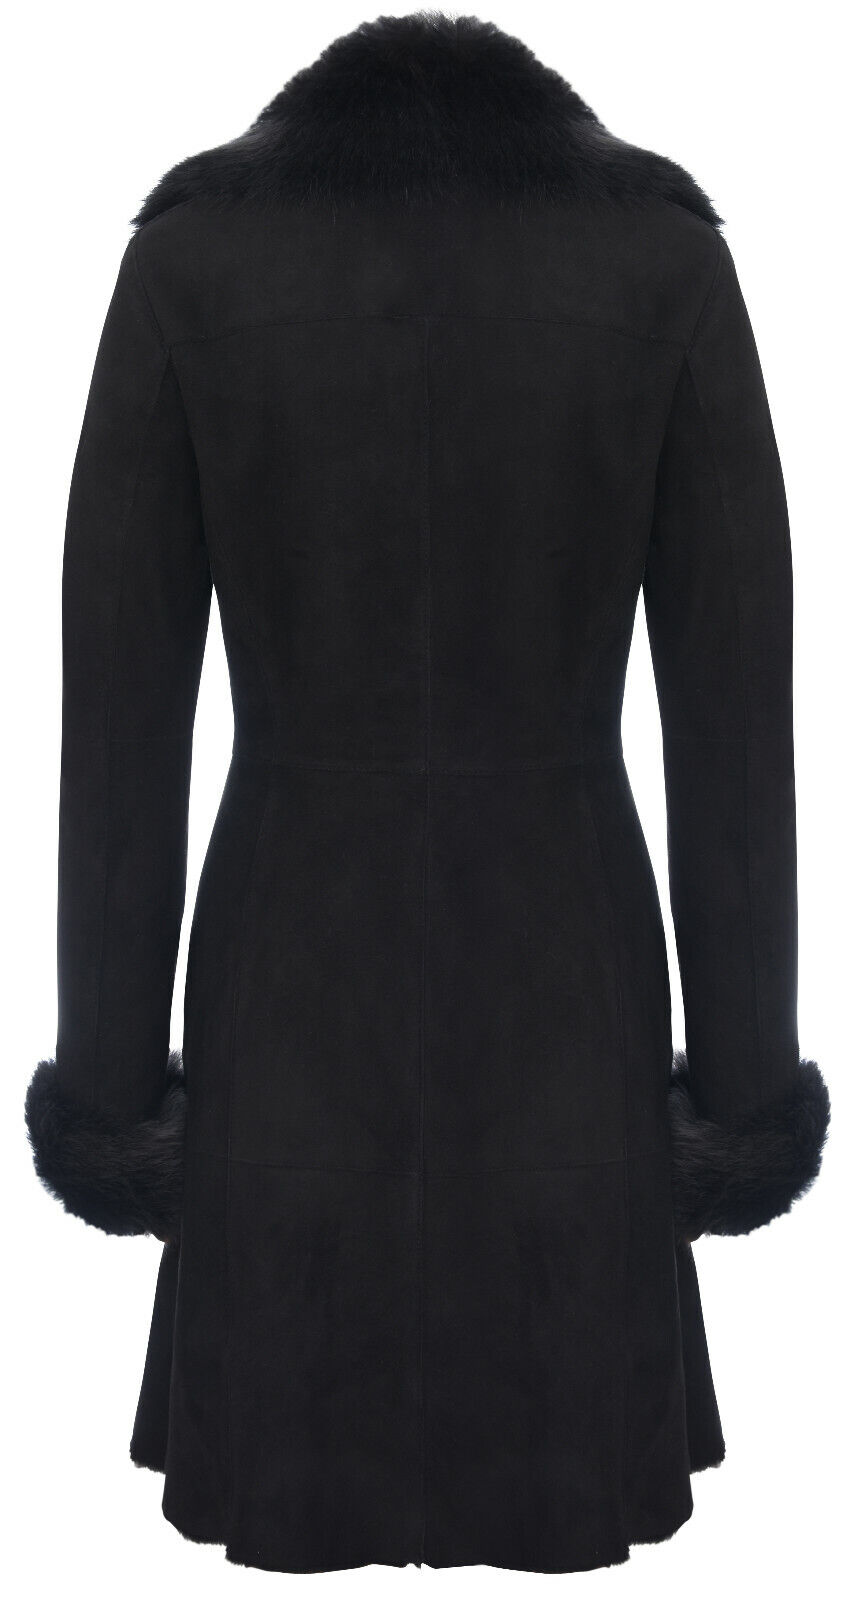 Pre-owned Infinity Ladies Warm Black Suede Merino Shearling Sheepskin Coat With Toscana Collar